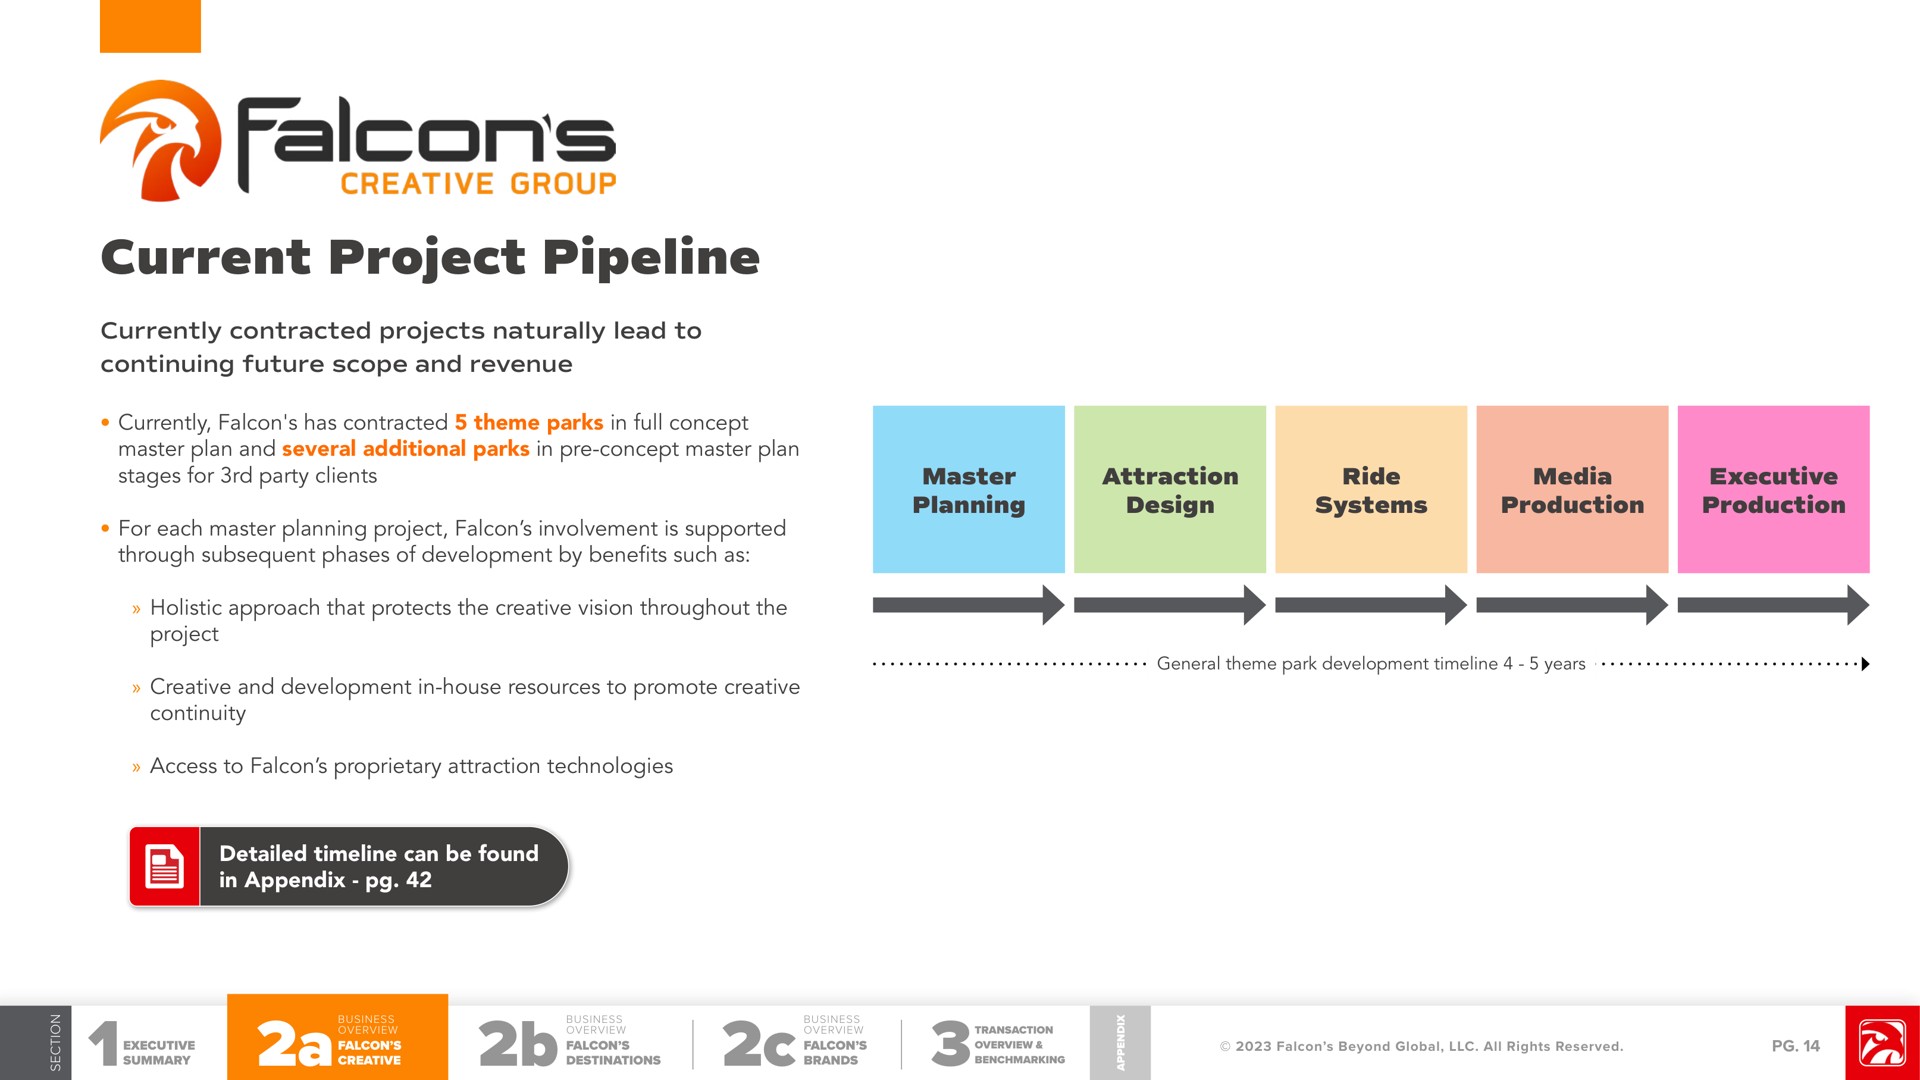 current project pipeline currently contracted projects naturally lead to continuing future scope and revenue master planning attraction design ride systems media production executive production falcons | Falcon's Beyond